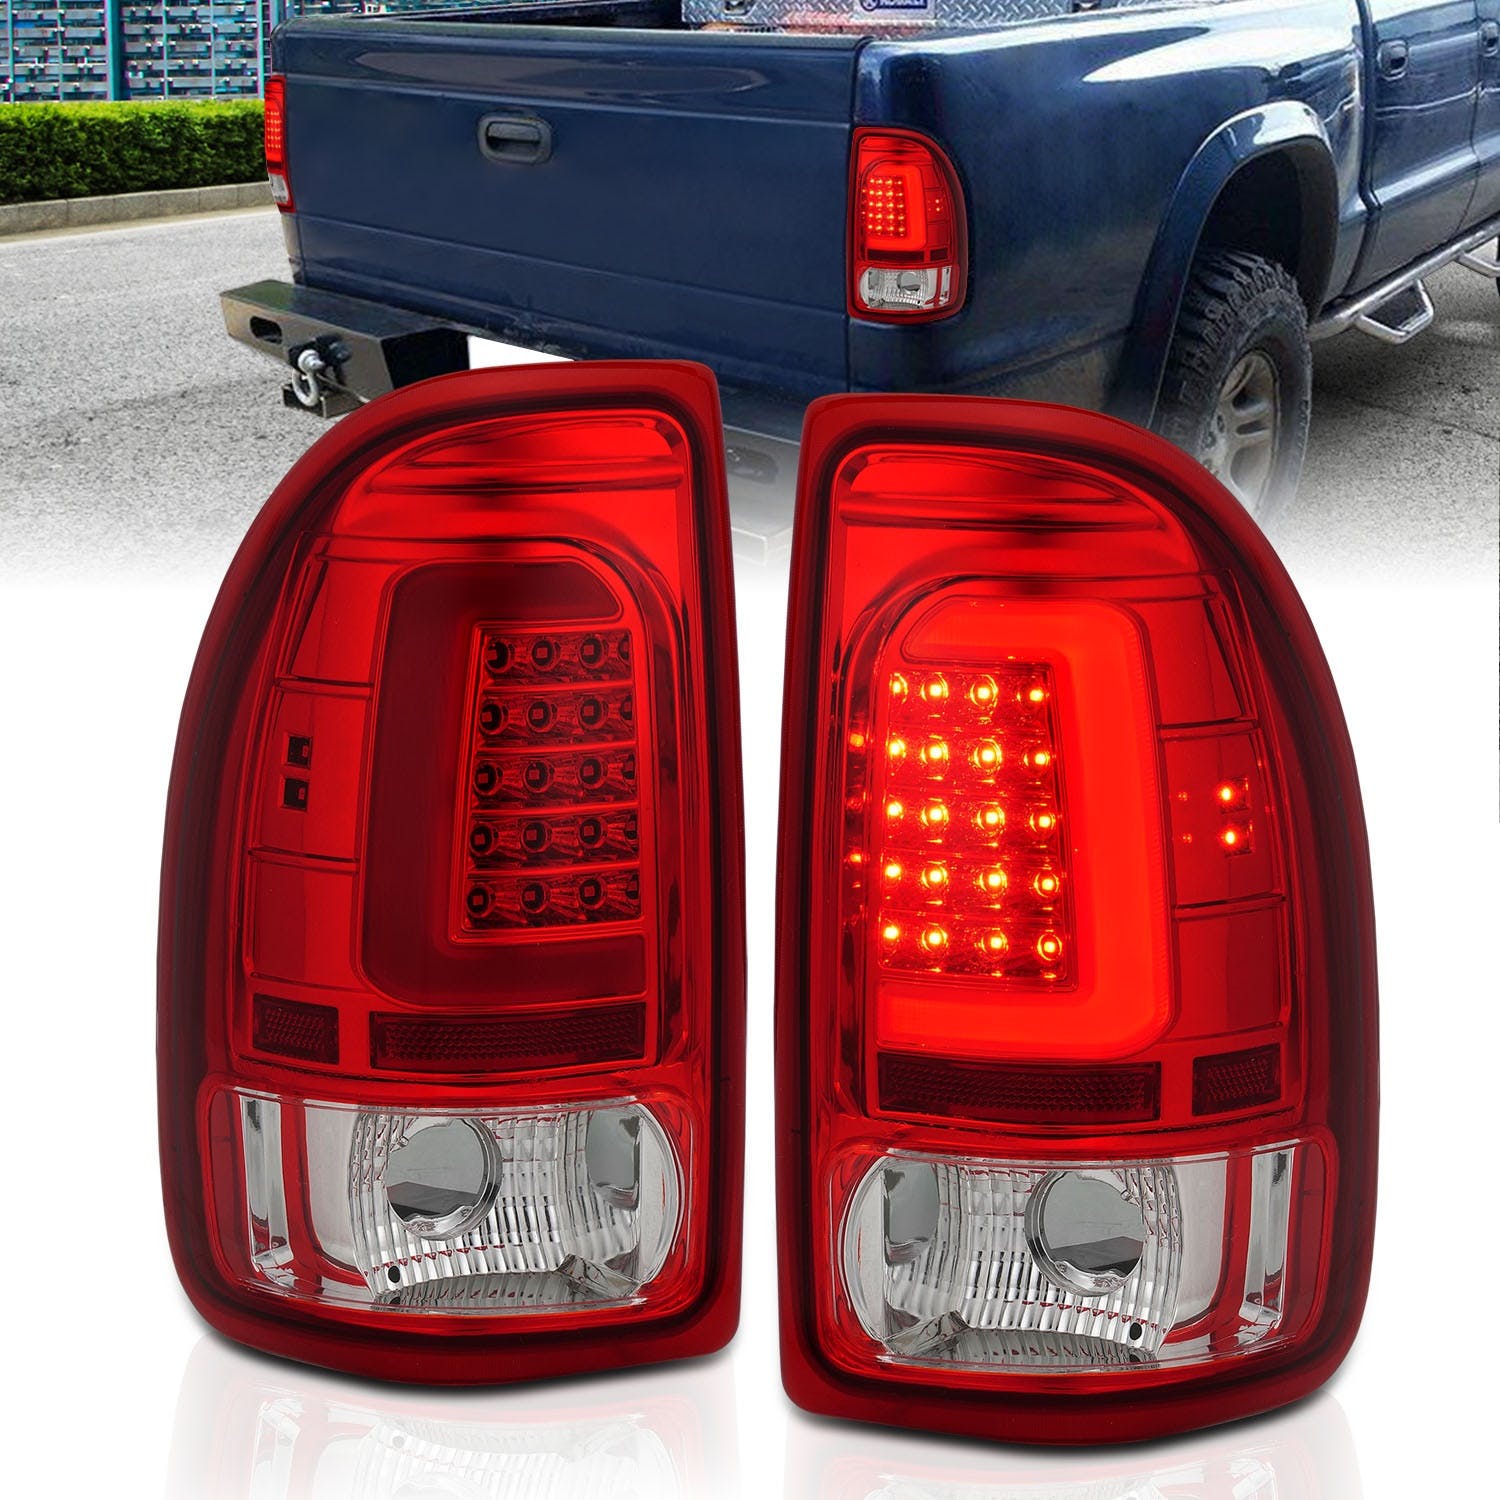 AnzoUSA 311349 LED Taillights Chrome Housing Red Lens